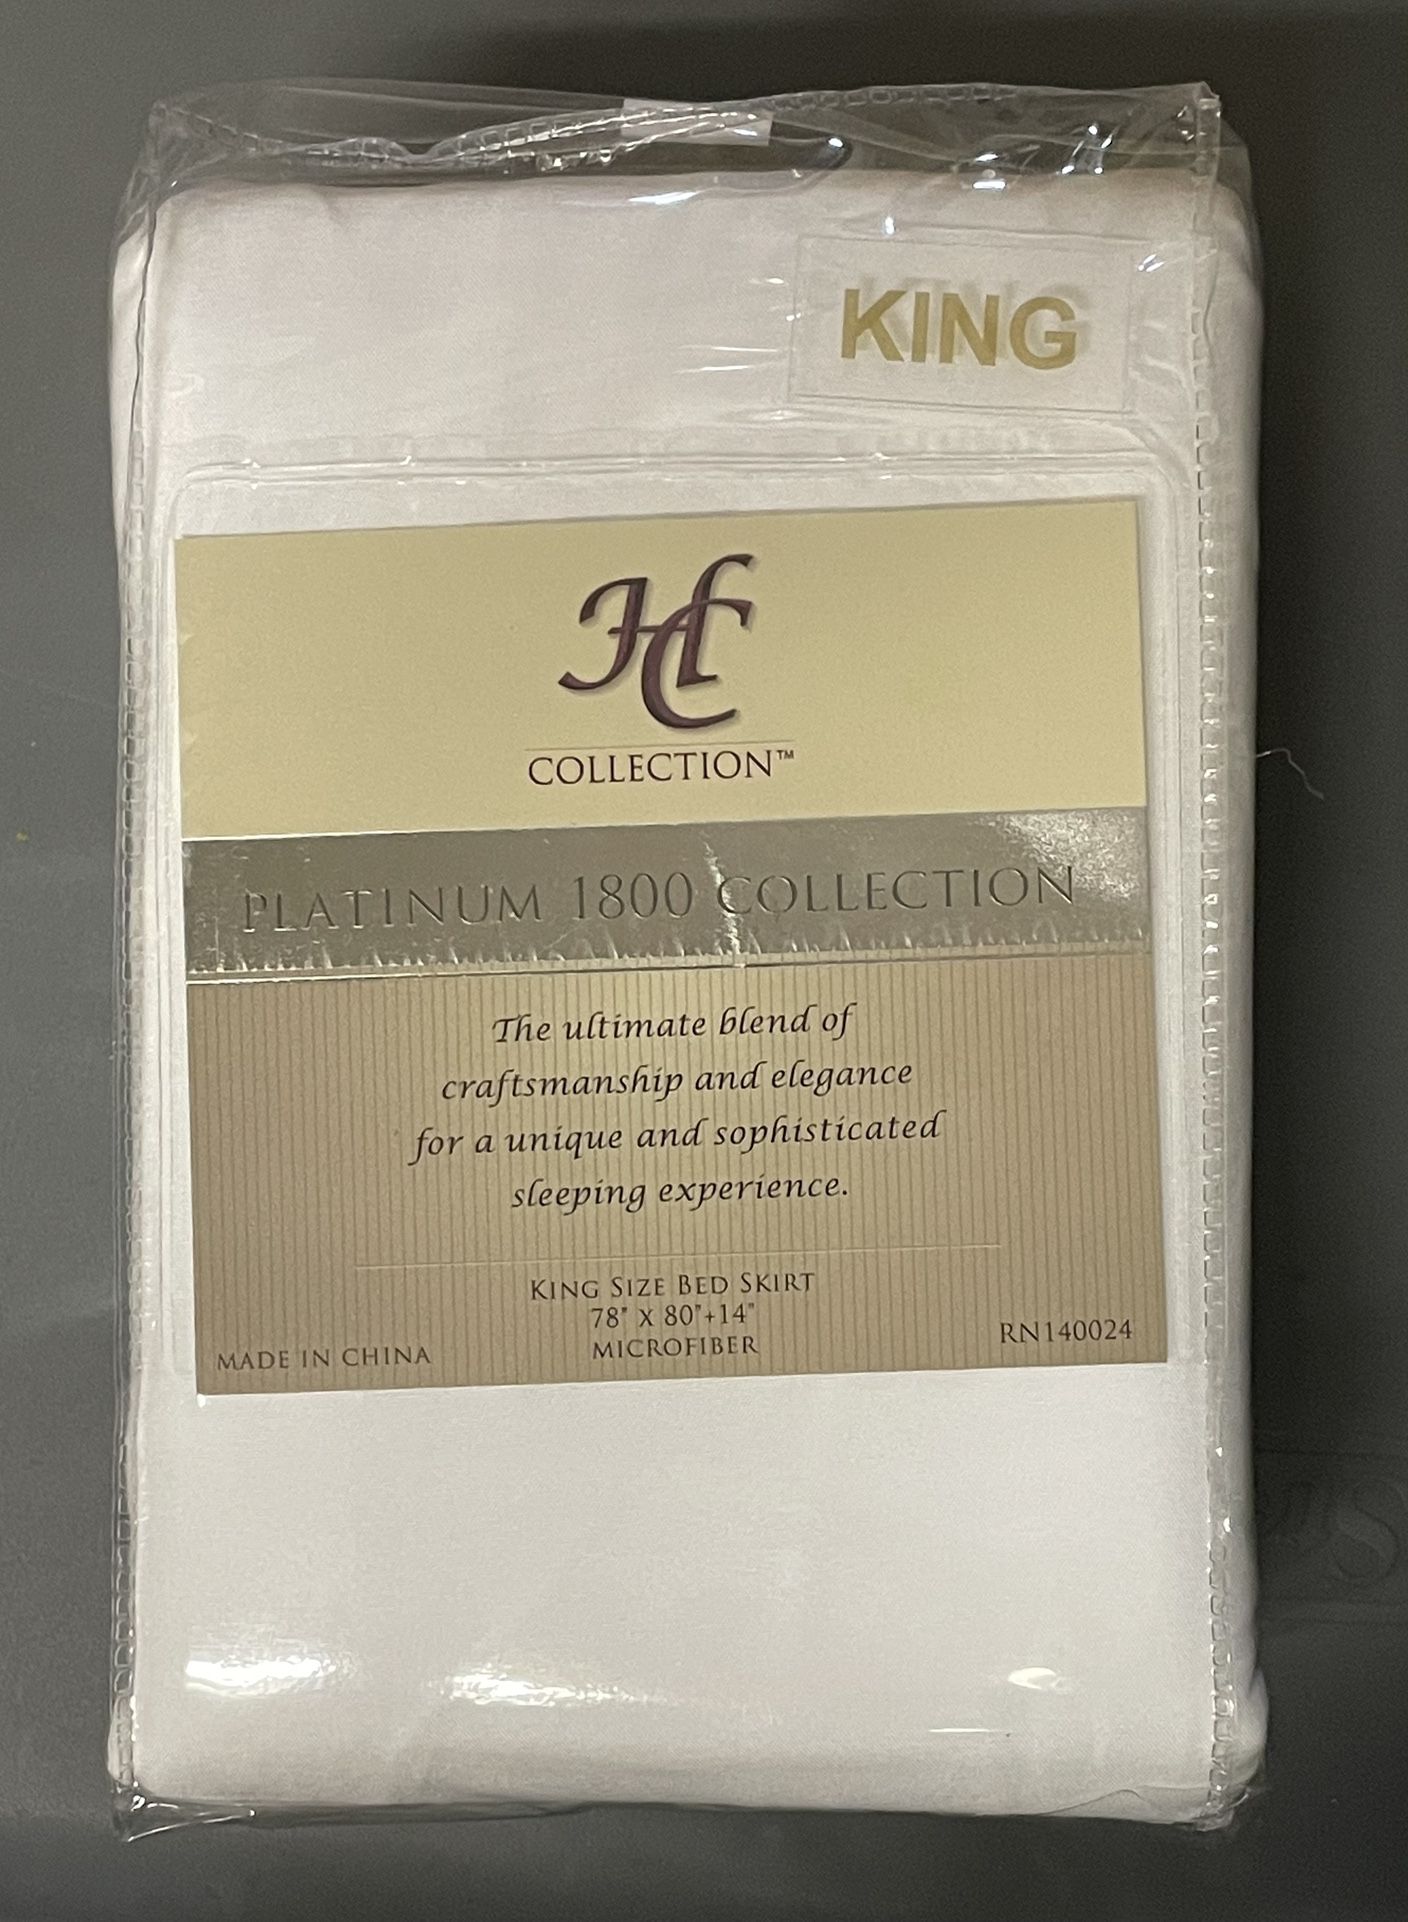 HC Collection Platinum 1800 Collection, King, microfiber Bed Skirt, white, NEW